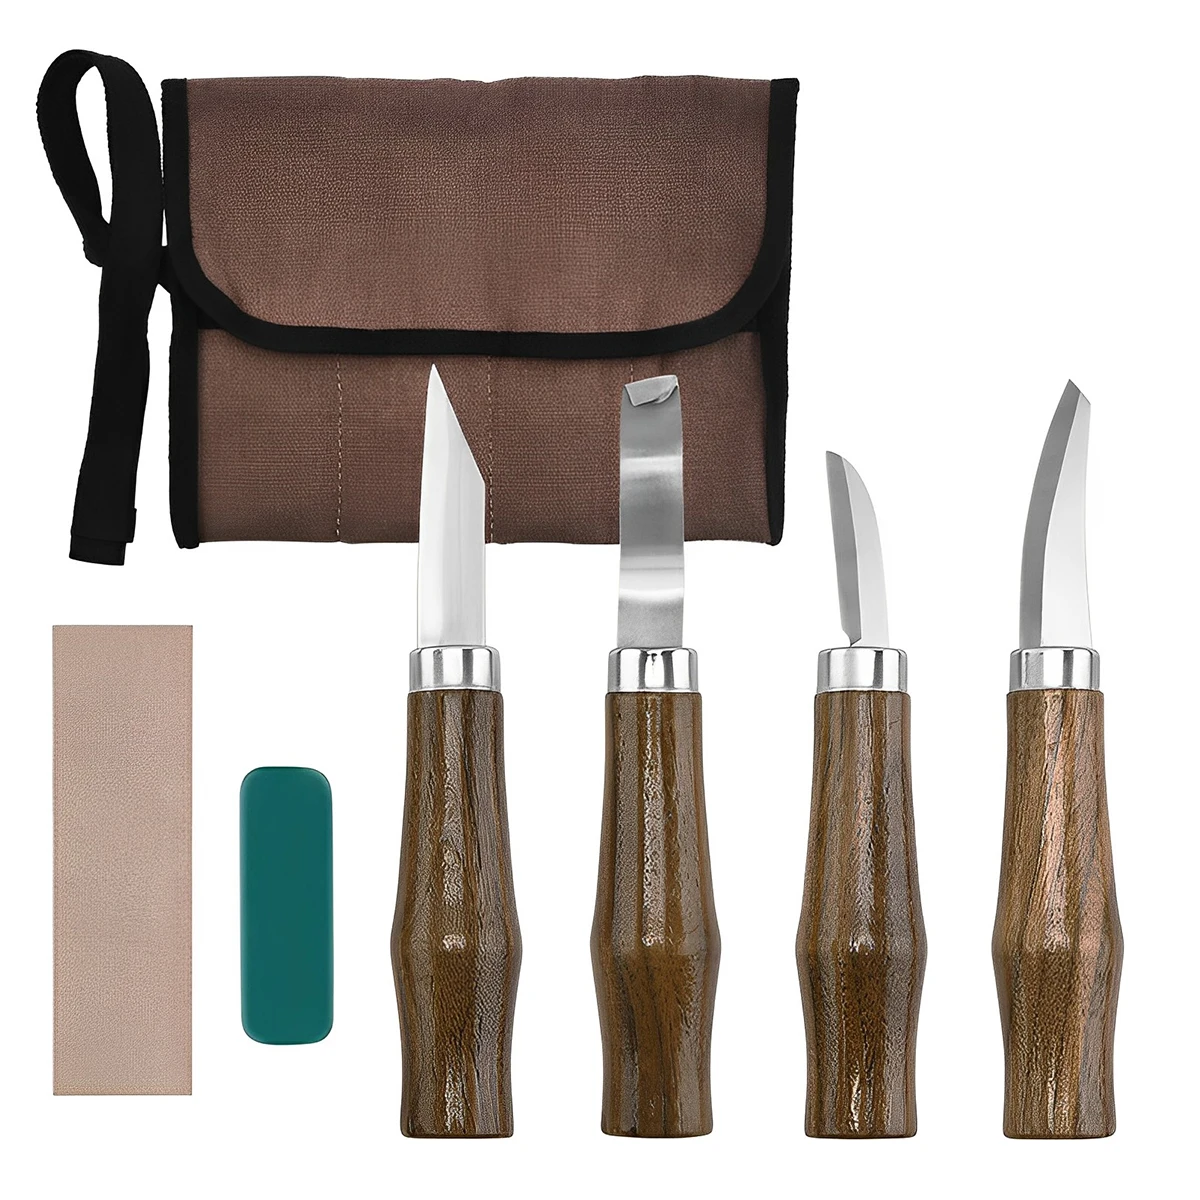 

Wood Carving Tools Set Wood Carving Chisels Portable Wood Engraving Tools Kit with Polishing Wax Sharpening Leather Storage Bag